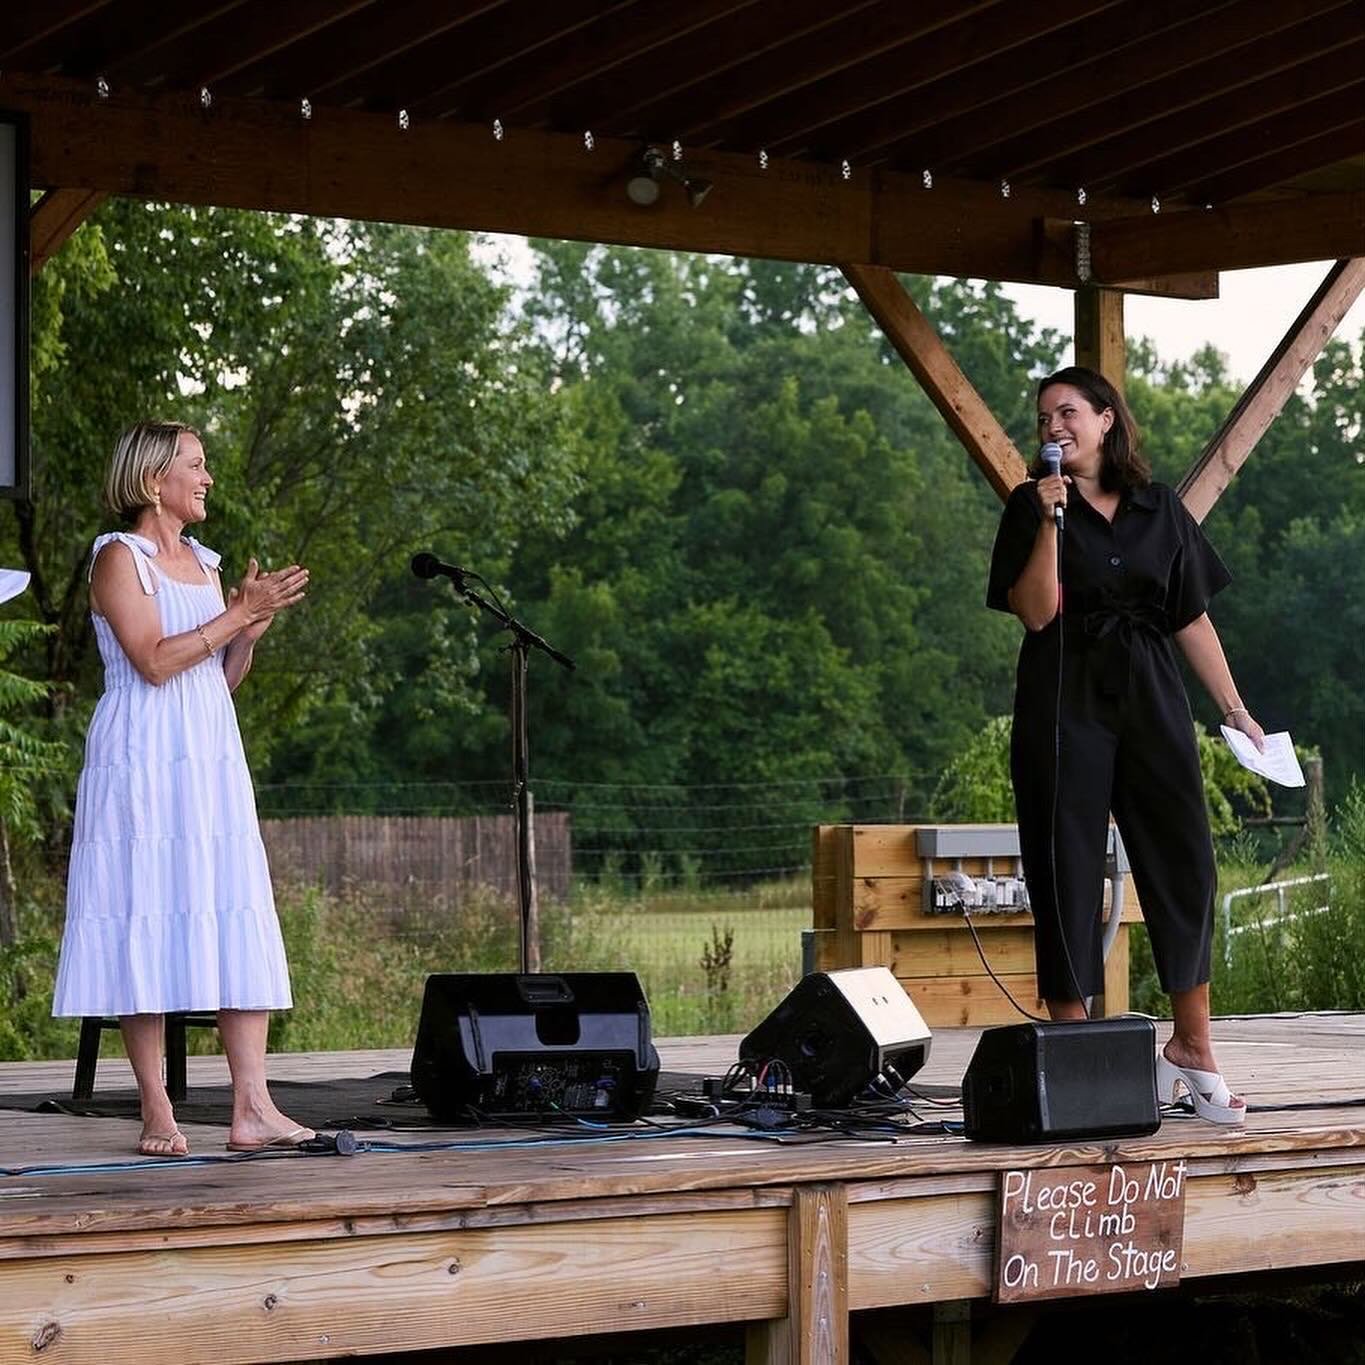 Flashback to past years' Make Local Work Summer Benefits! We are so excited to gather again this year on June 27th in support of the Stockade Works Scholarship Fund.

Join us at @arrowoodfarms for an evening of live music from @bigtakeoverband, refre